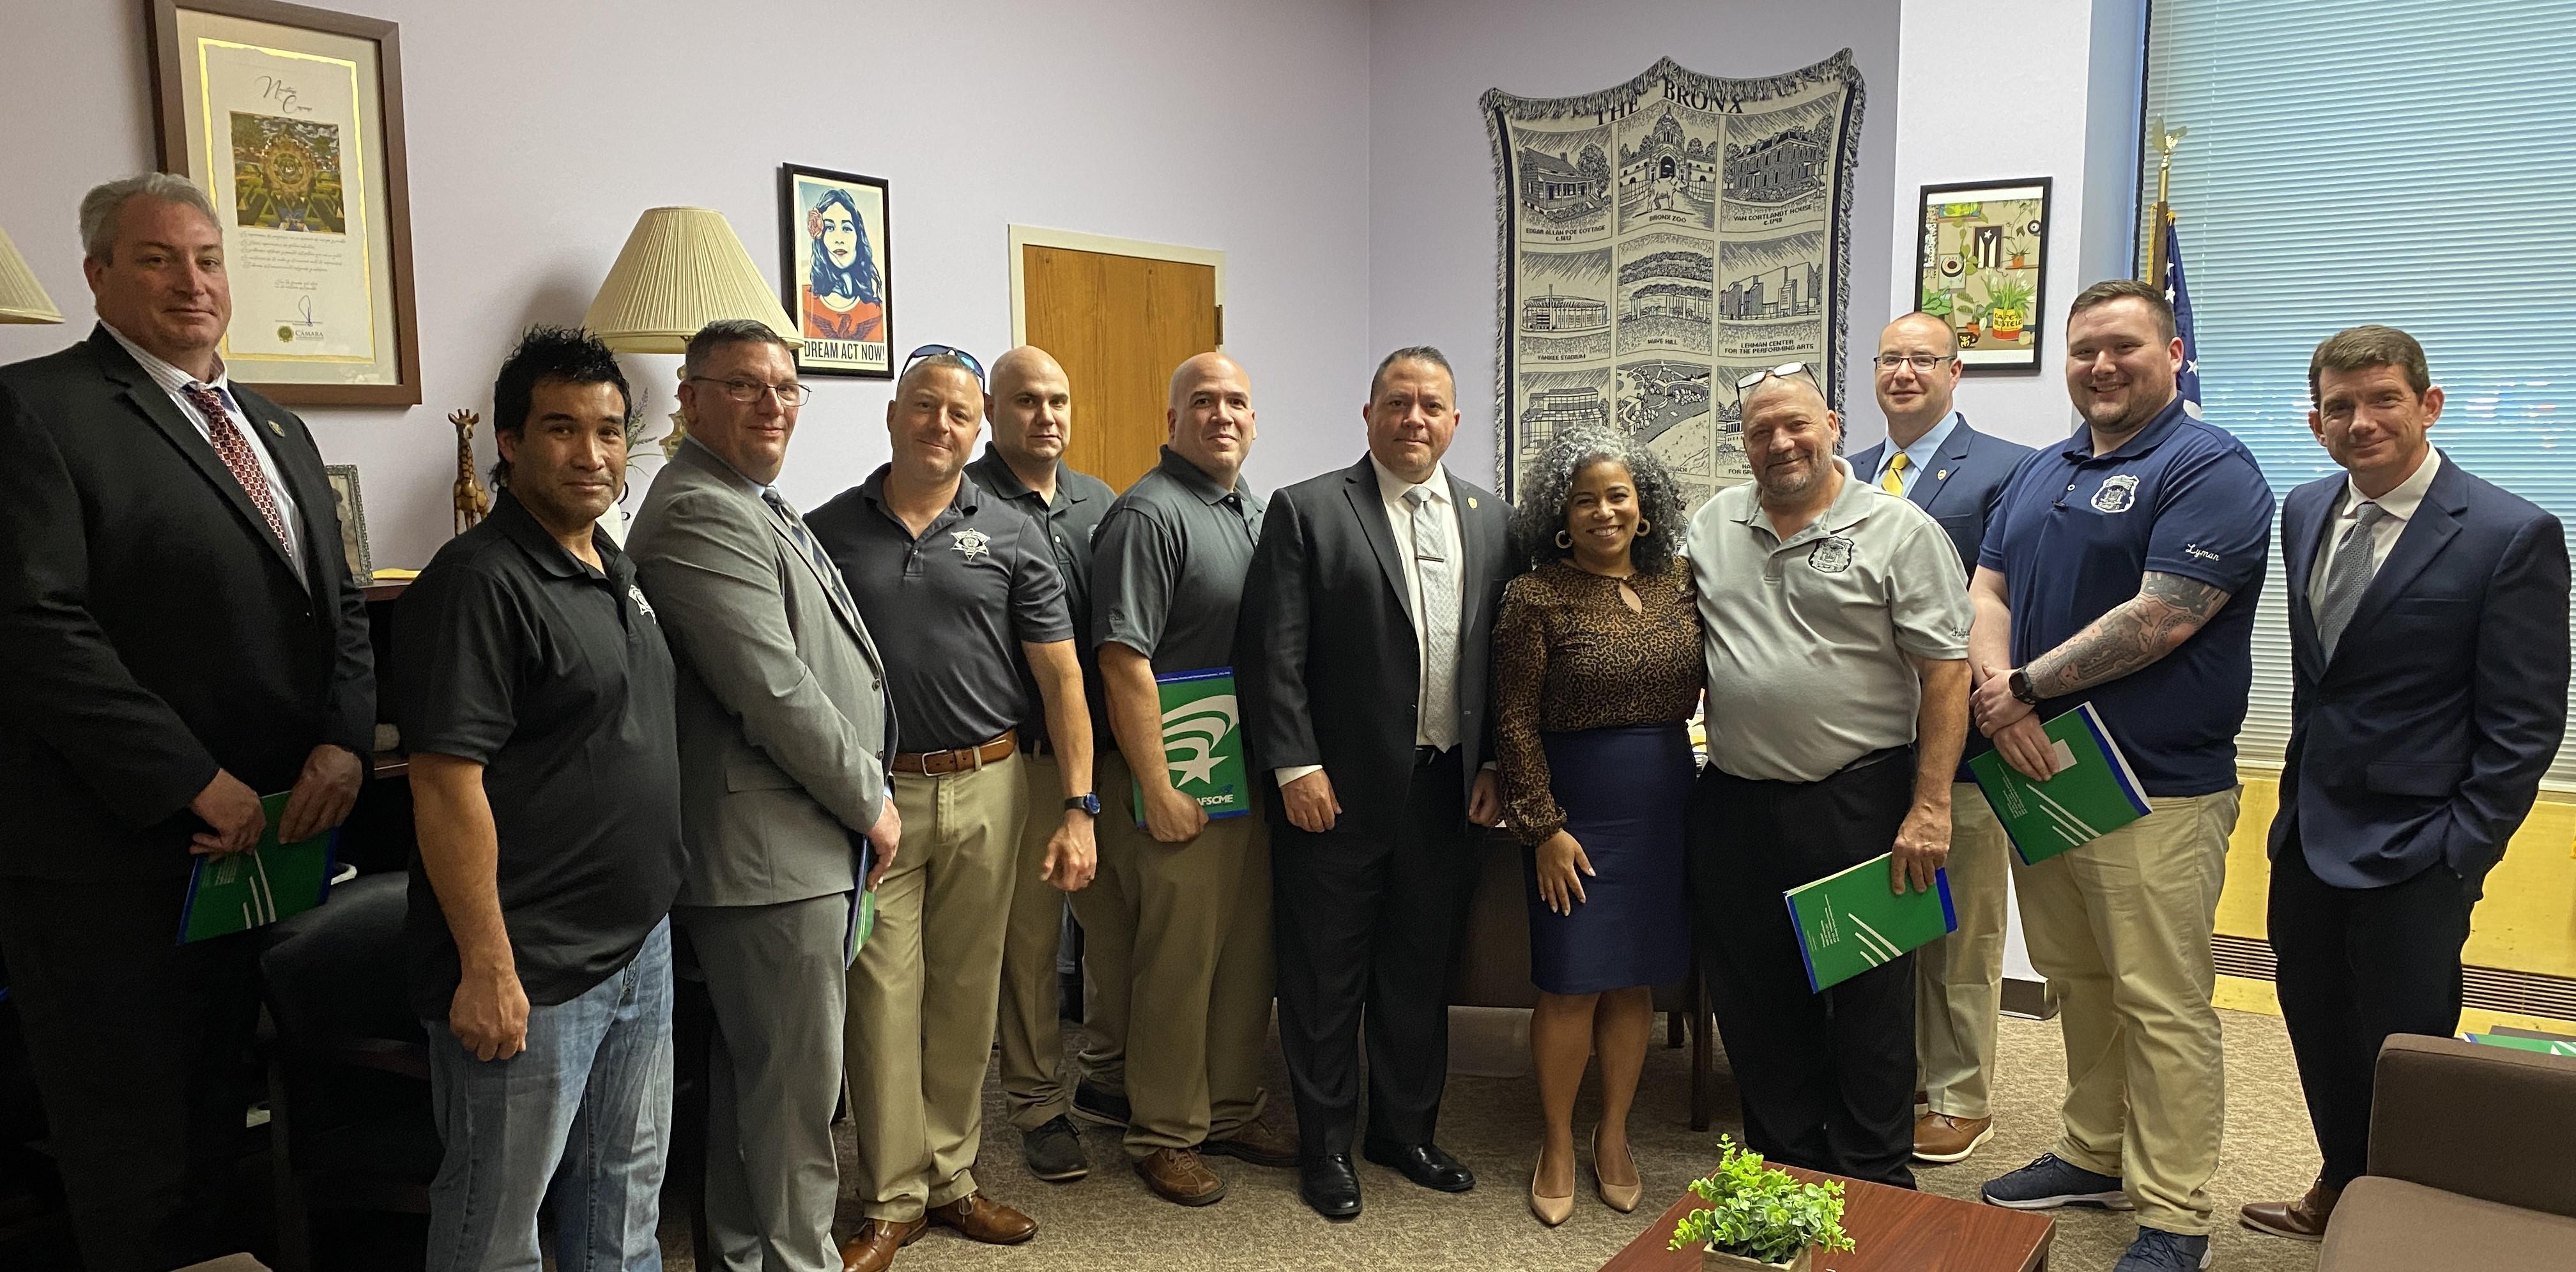 Members of Council 82 met with Assemblywoman Karines Reyes to discuss their policy priorities. Photo credit: Aaron Gallant/AFSCME.